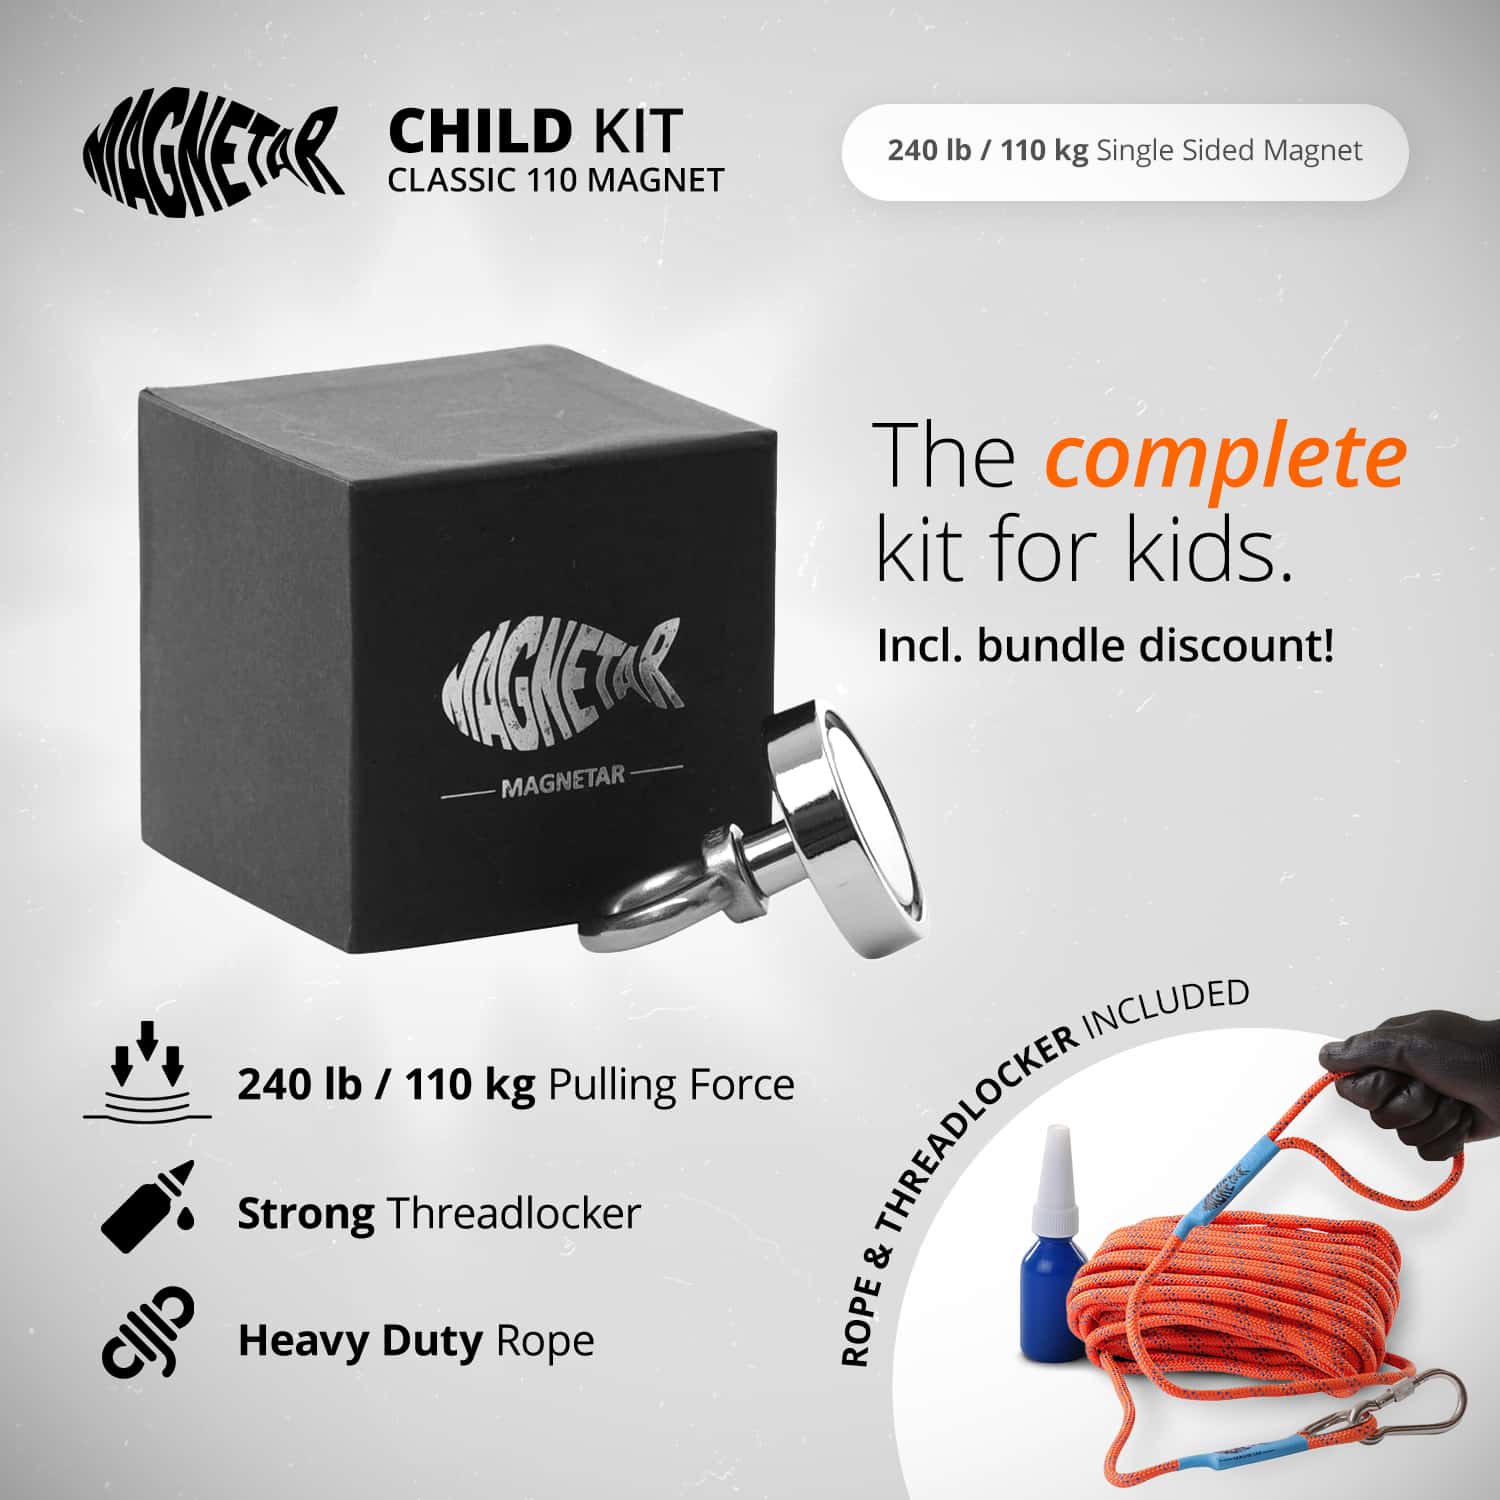 Kids package - 250lb / 110kg - Single sided - Magnet fishing with a  Magnetar fishing magnet